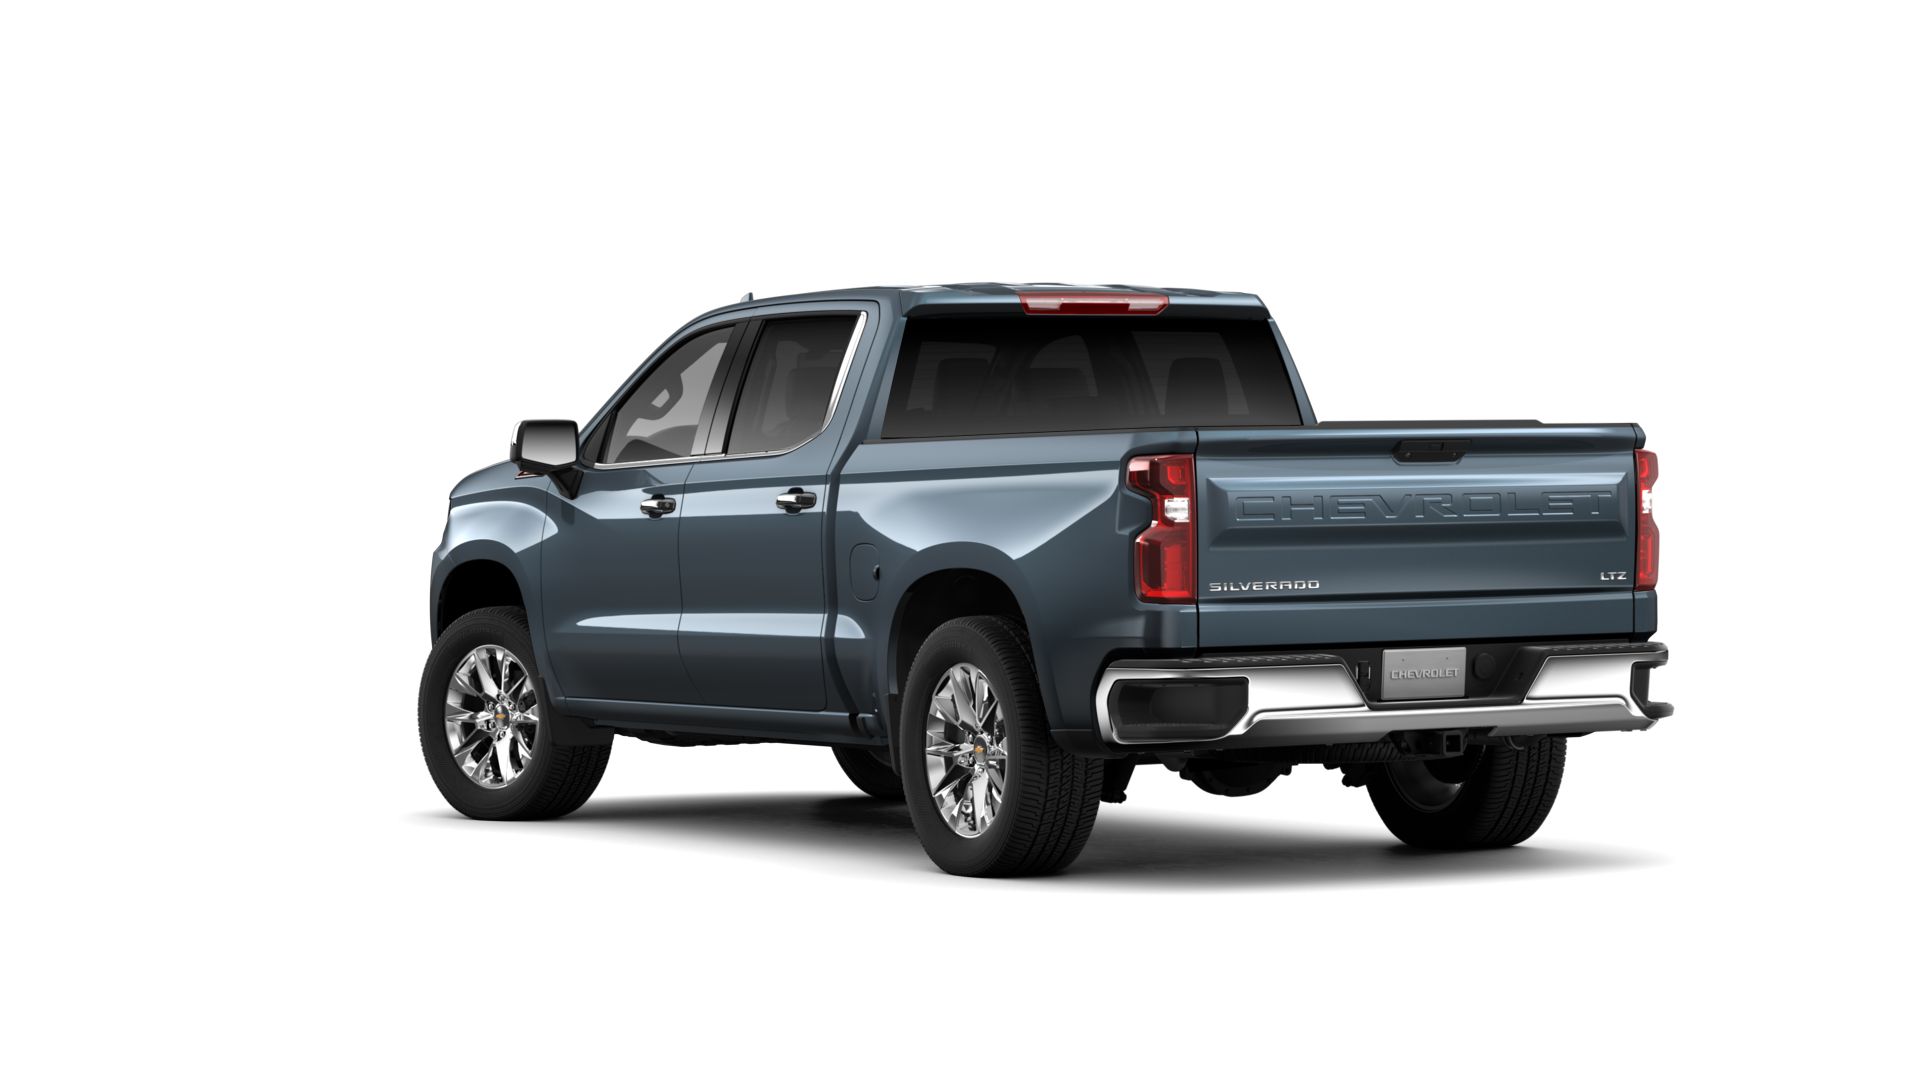 Used 2019 Chevrolet Silverado 1500 LTZ with VIN 3GCUYGED5KG153986 for sale in Red Lake Falls, Minnesota